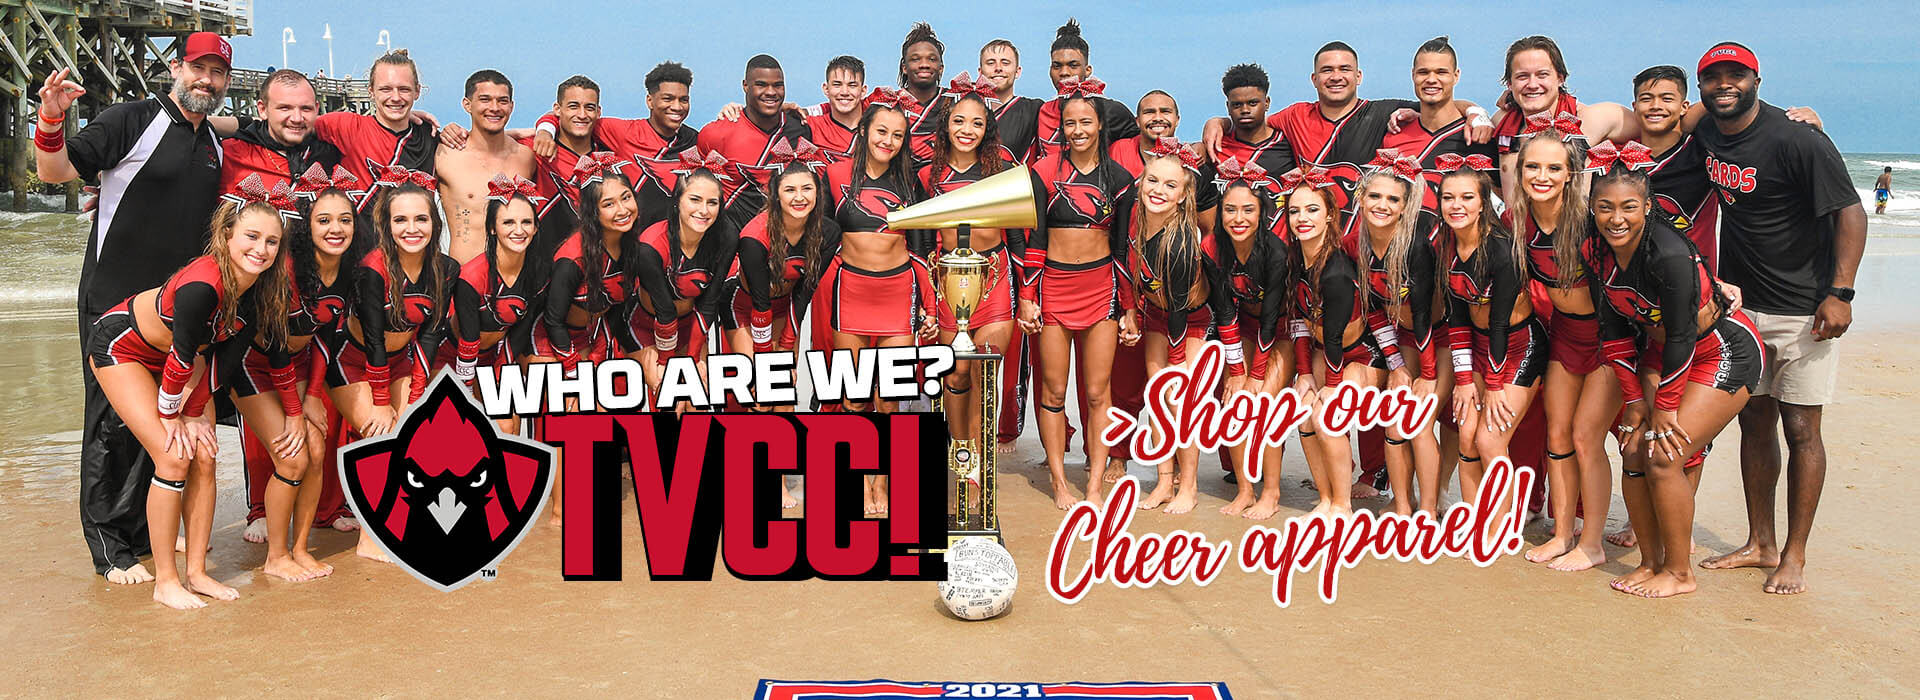 Who are we? TVCC!  Shop our cheer apparel!